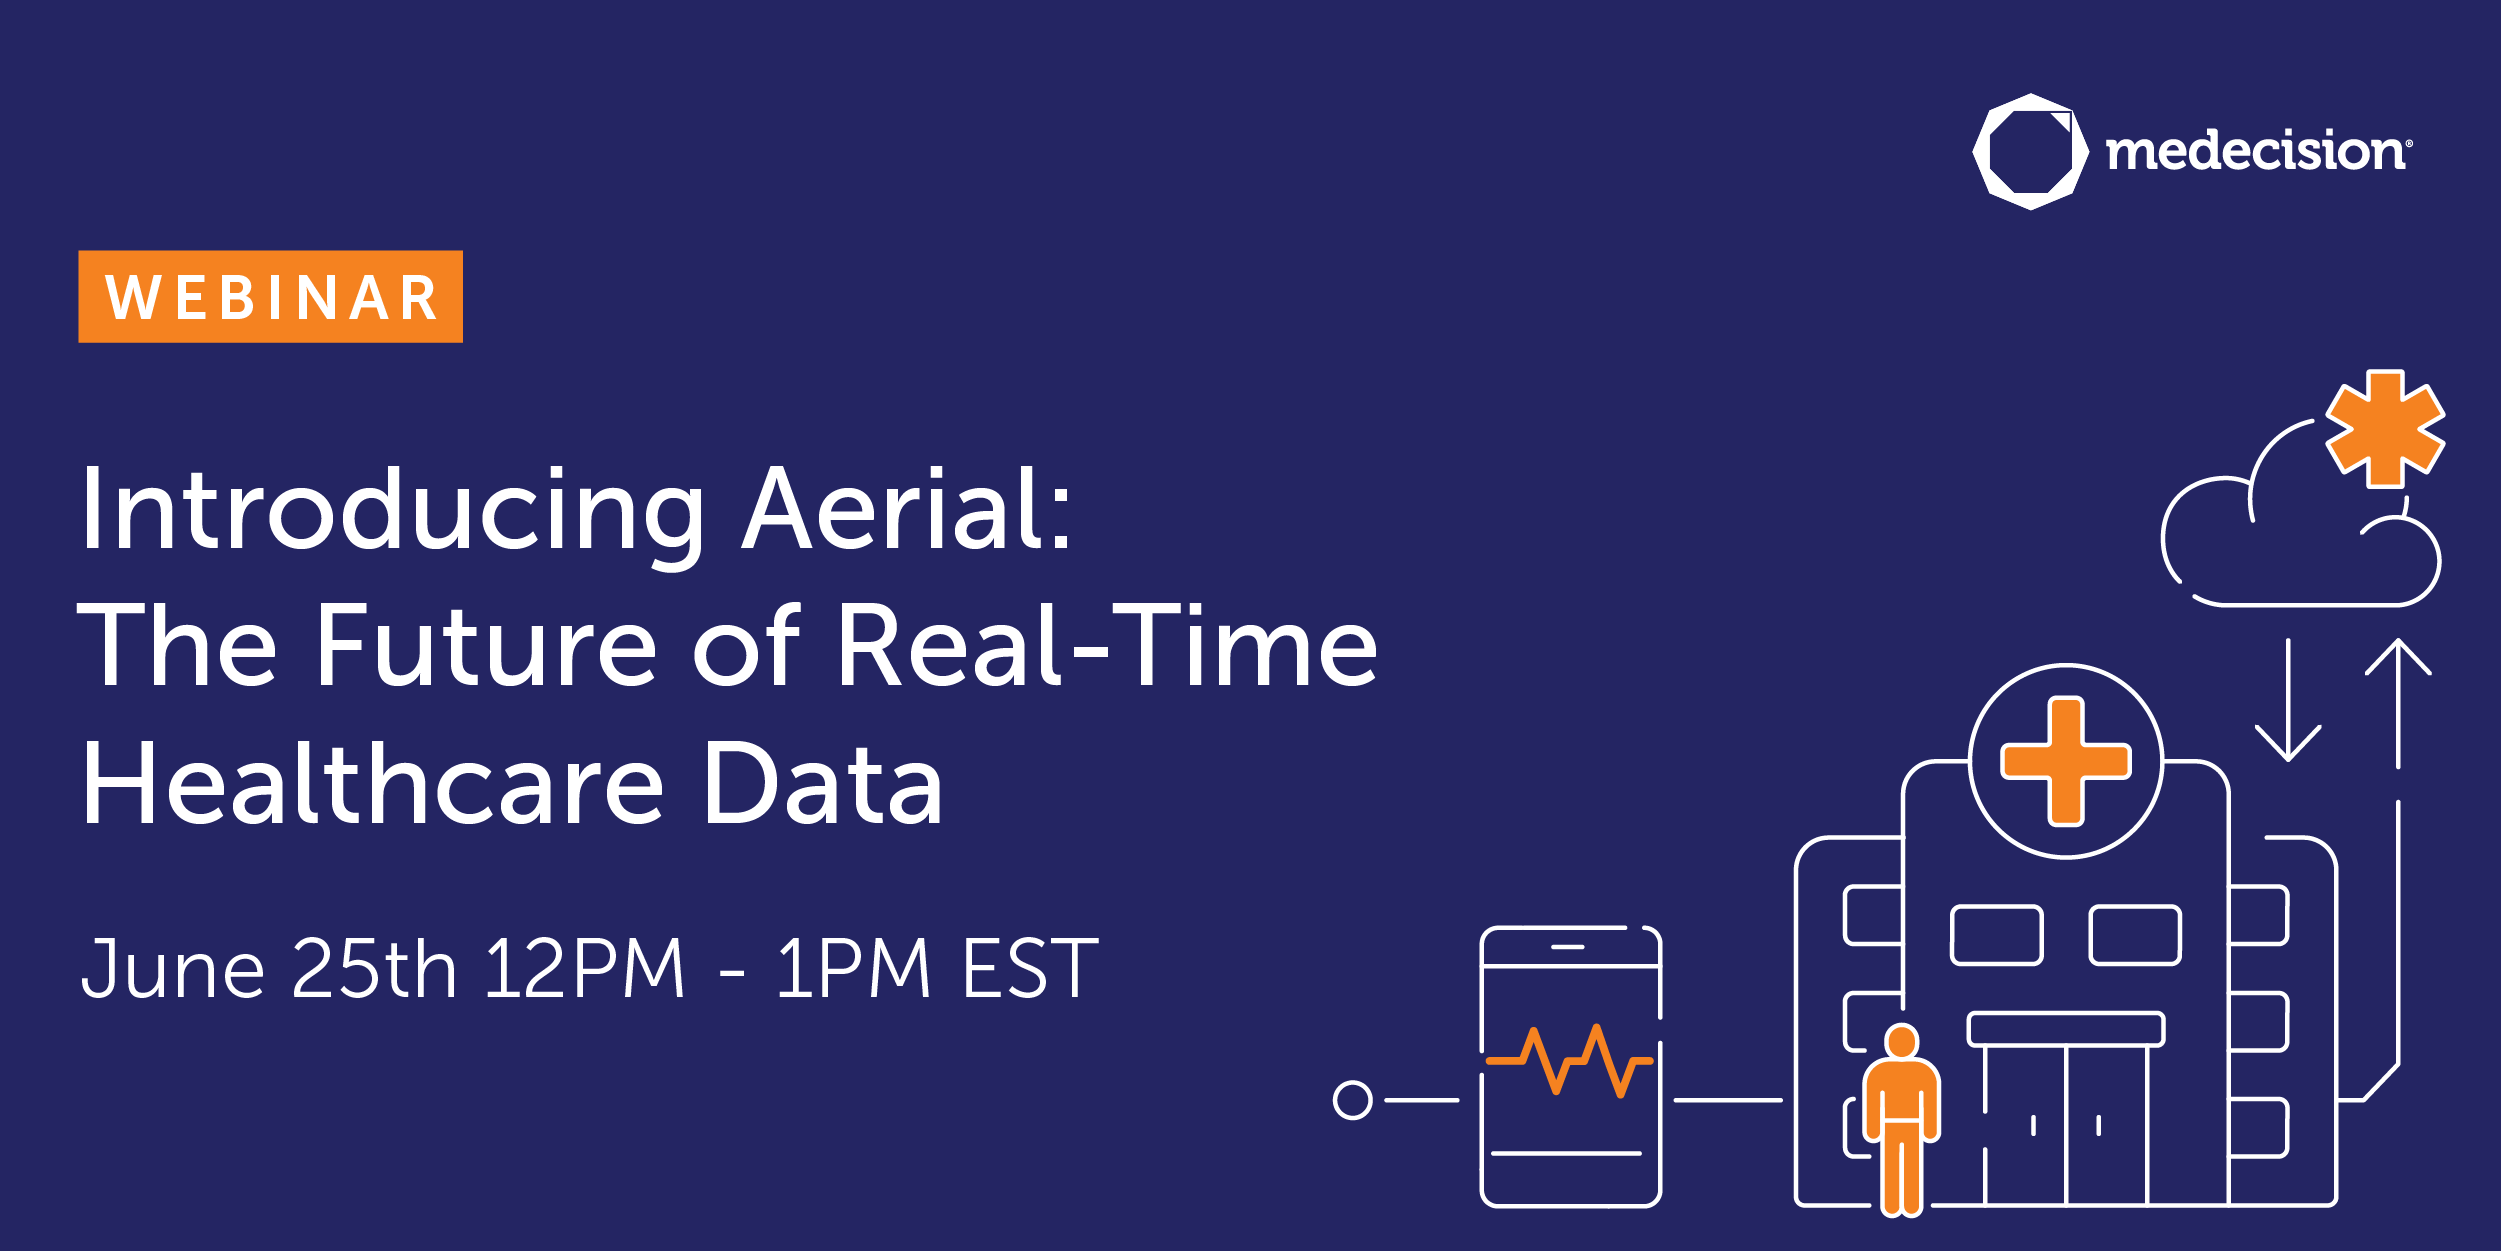 Webinar: Introducing Aerial, the future of real-time healthcare data on June 25 12PM to 1PM